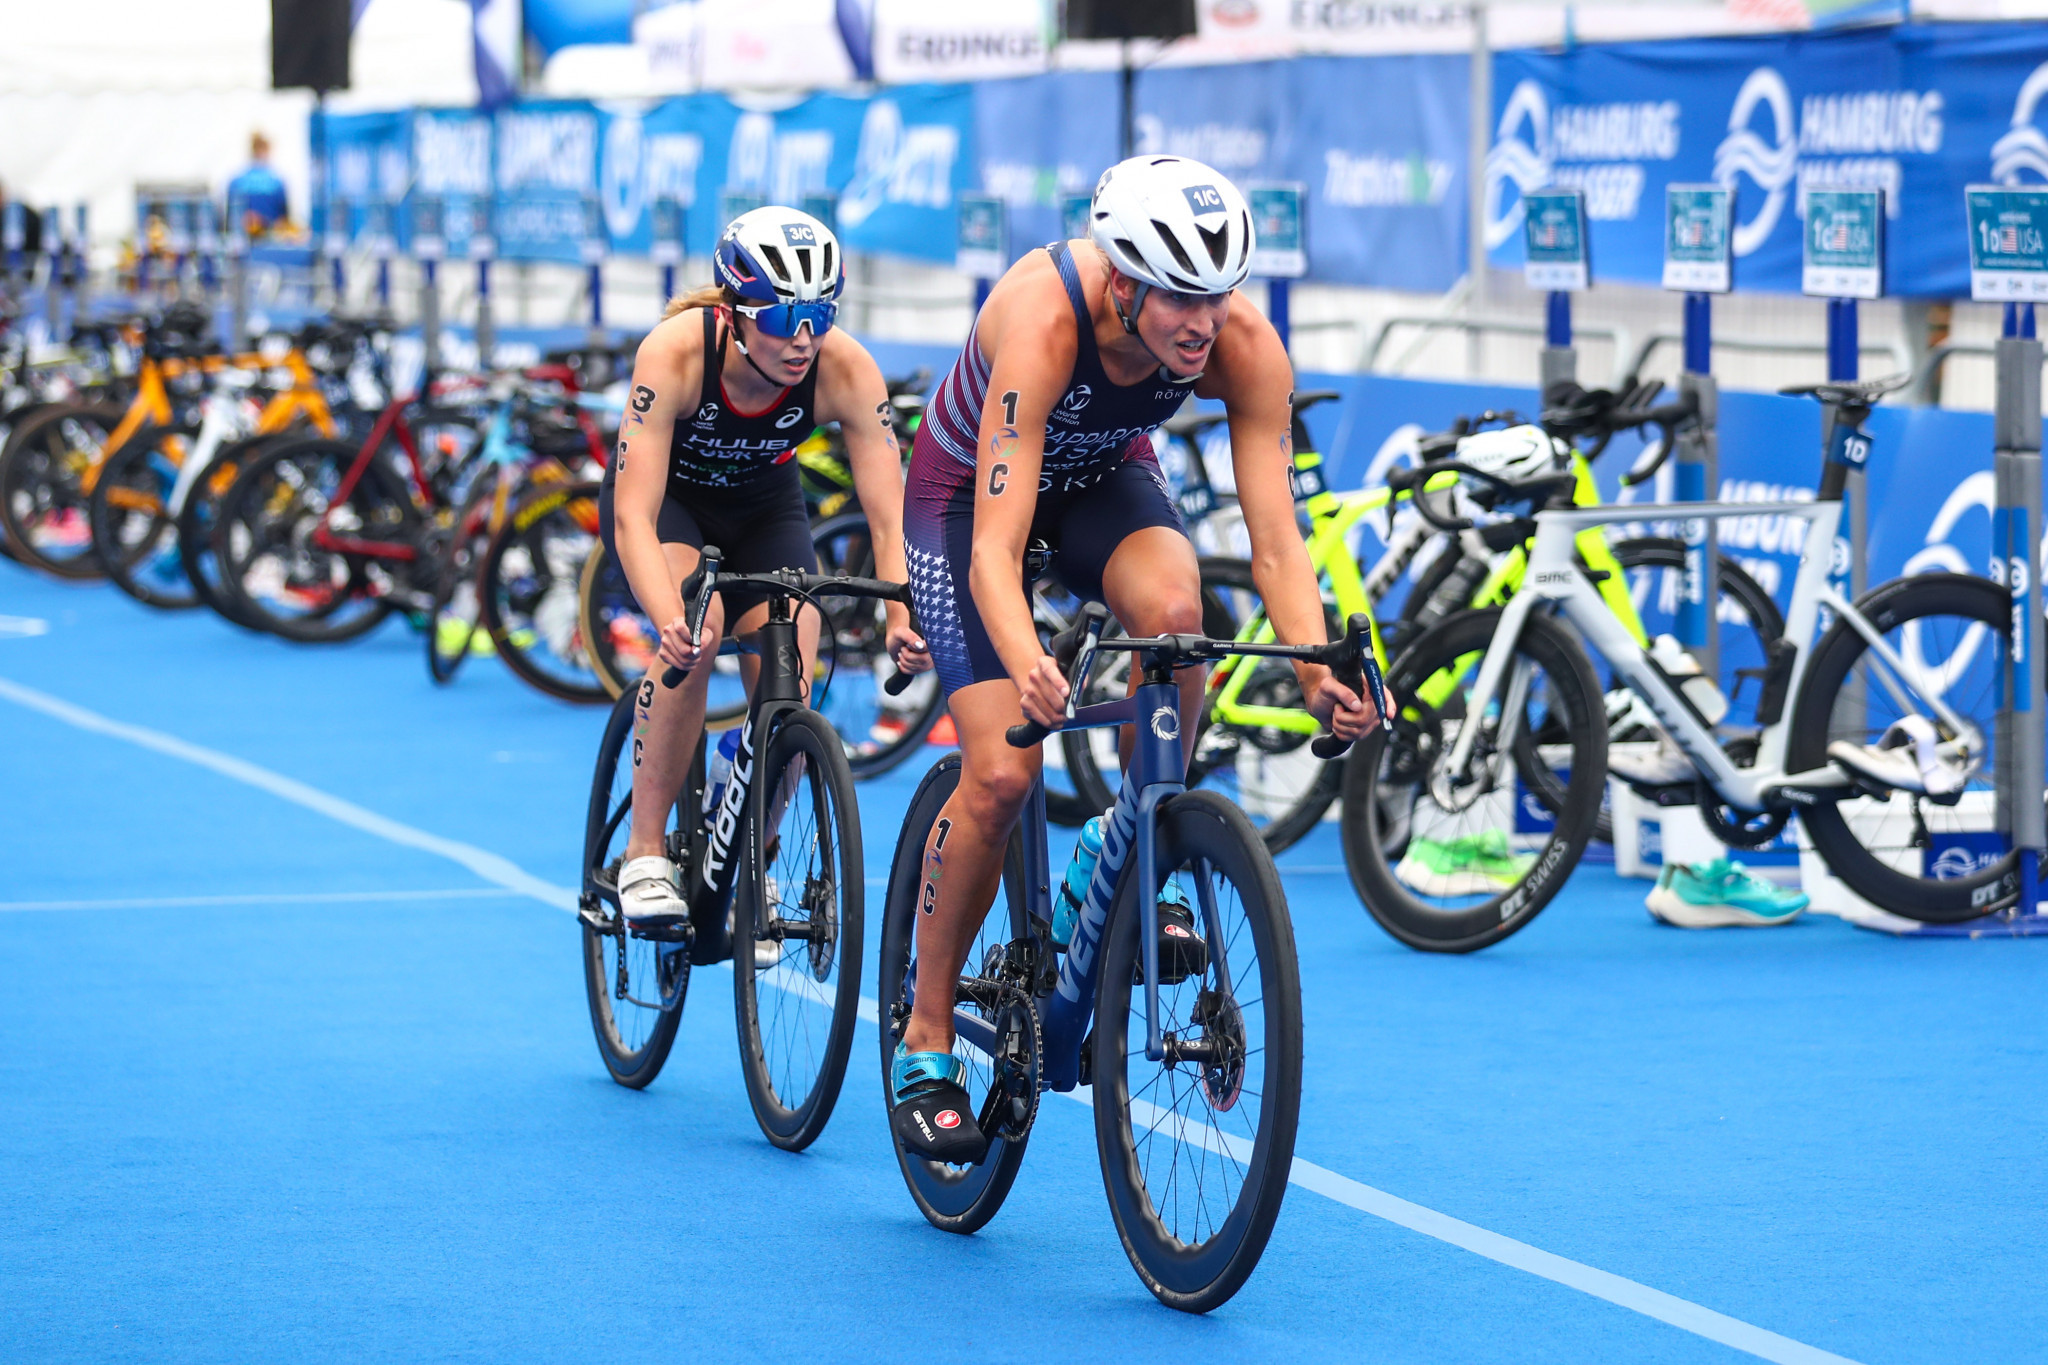 Bermuda has previously hosted World Triathlon events in 2018 and 2019 ©Getty Images